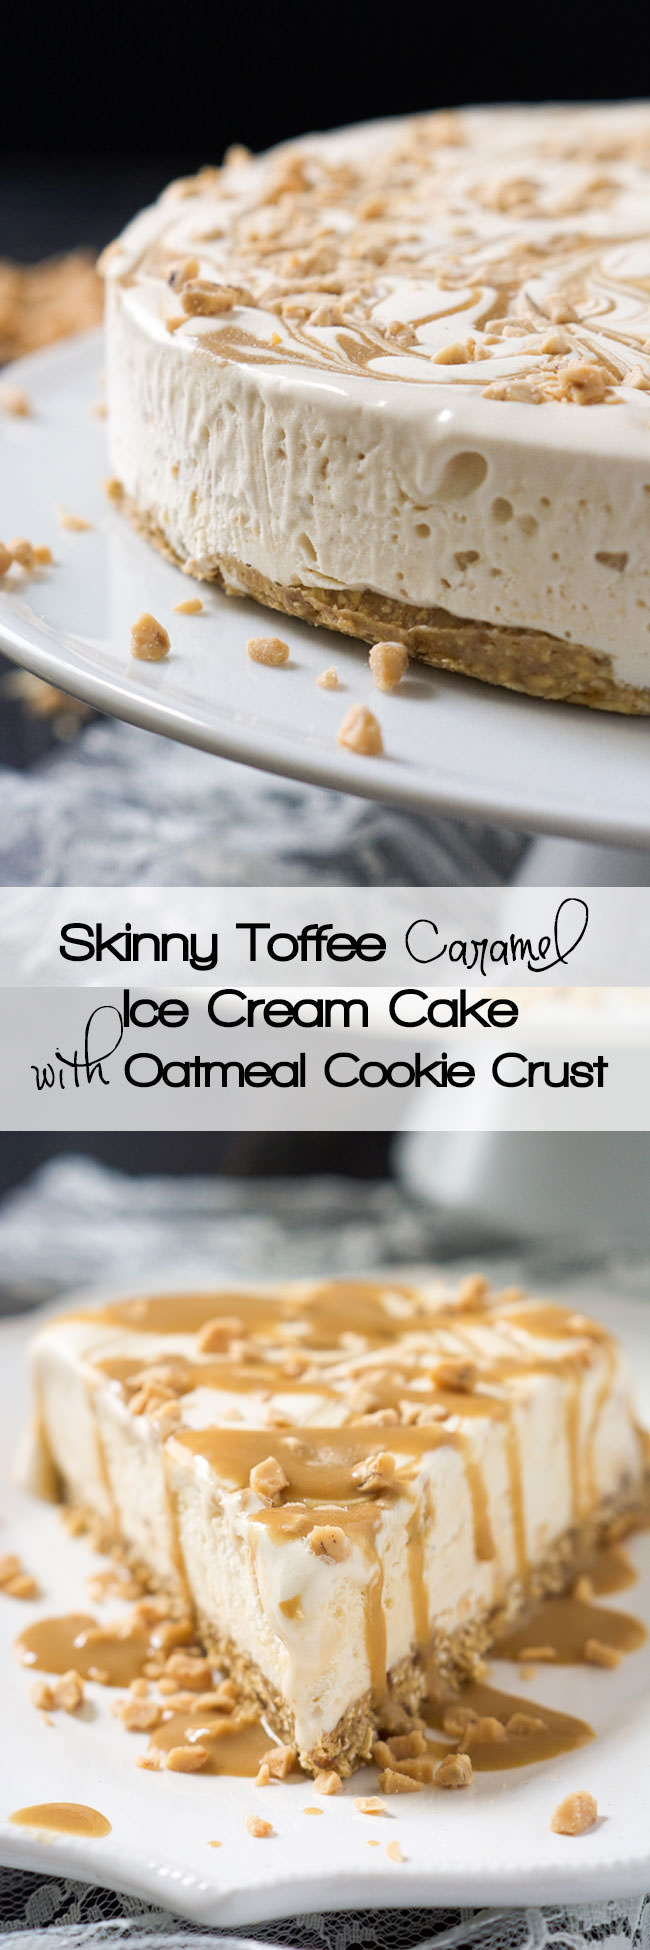 The perfect summer make ahead dessert; Skinny Toffee Caramel Ice Cream Cake has a no bake Oatmeal Cookie Crust that is a match made in heaven! 